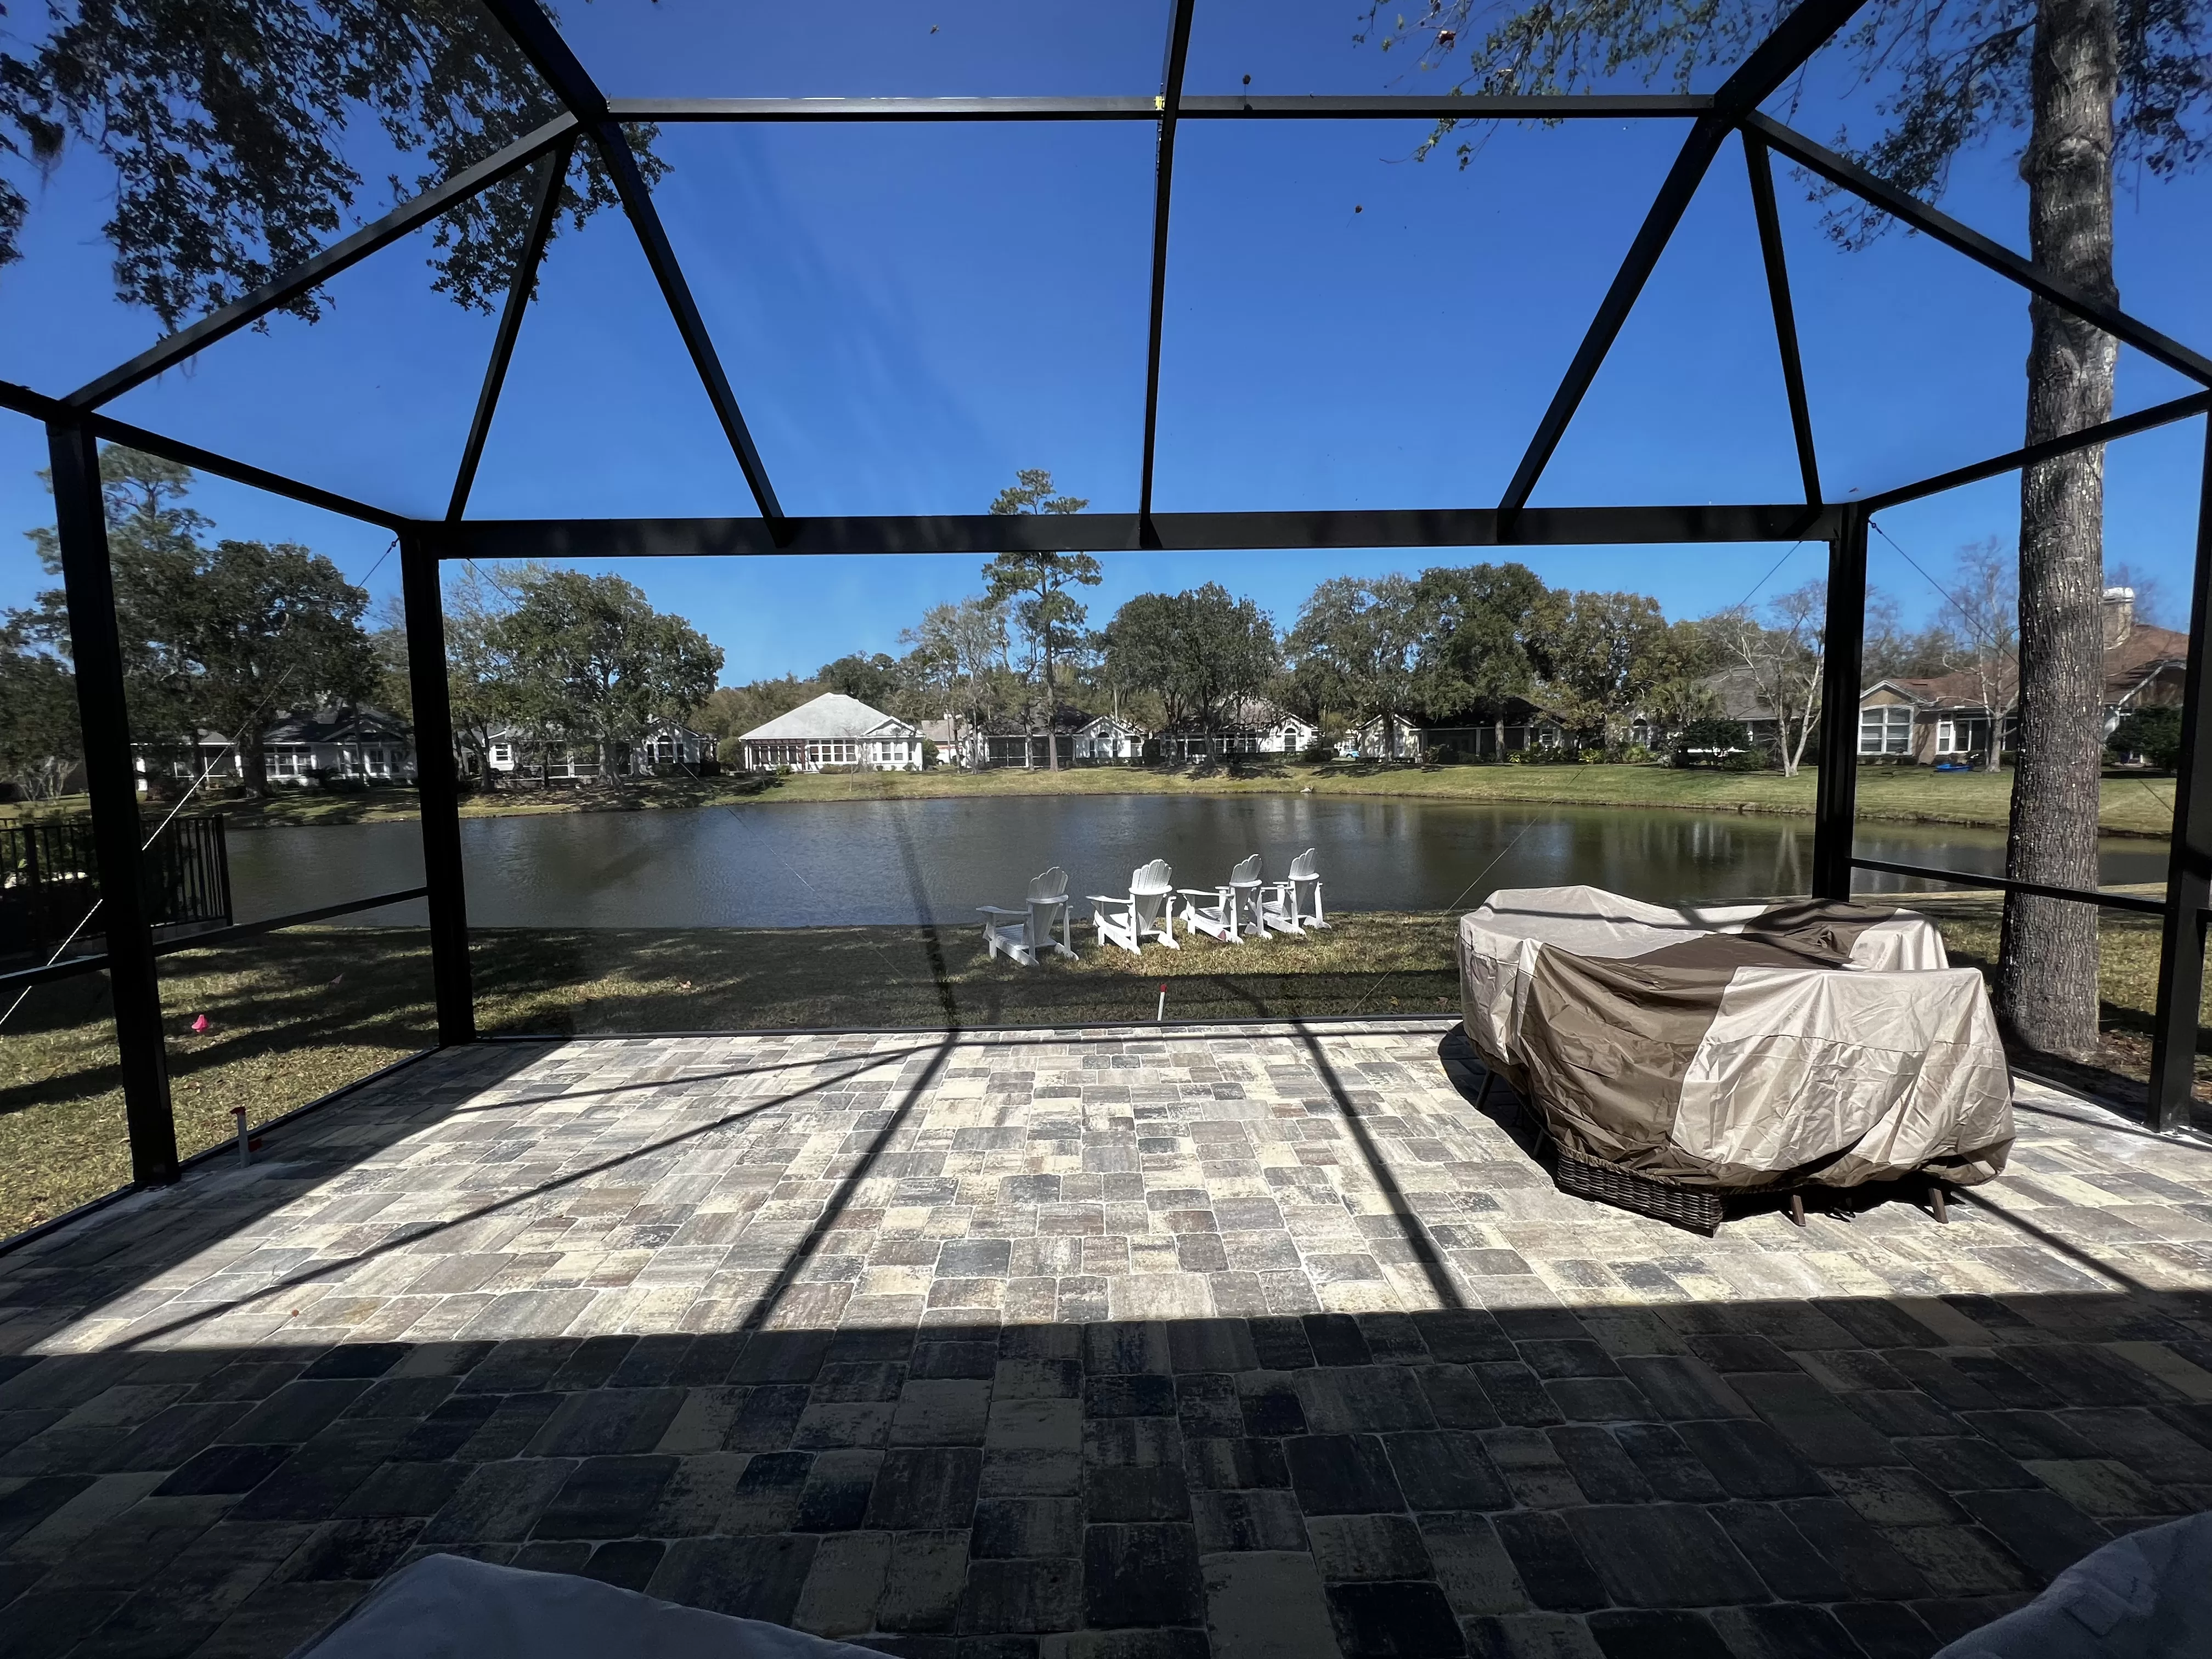 This screen enclosure allows you to take in the sights of this beautiful lake without and obstructed view.